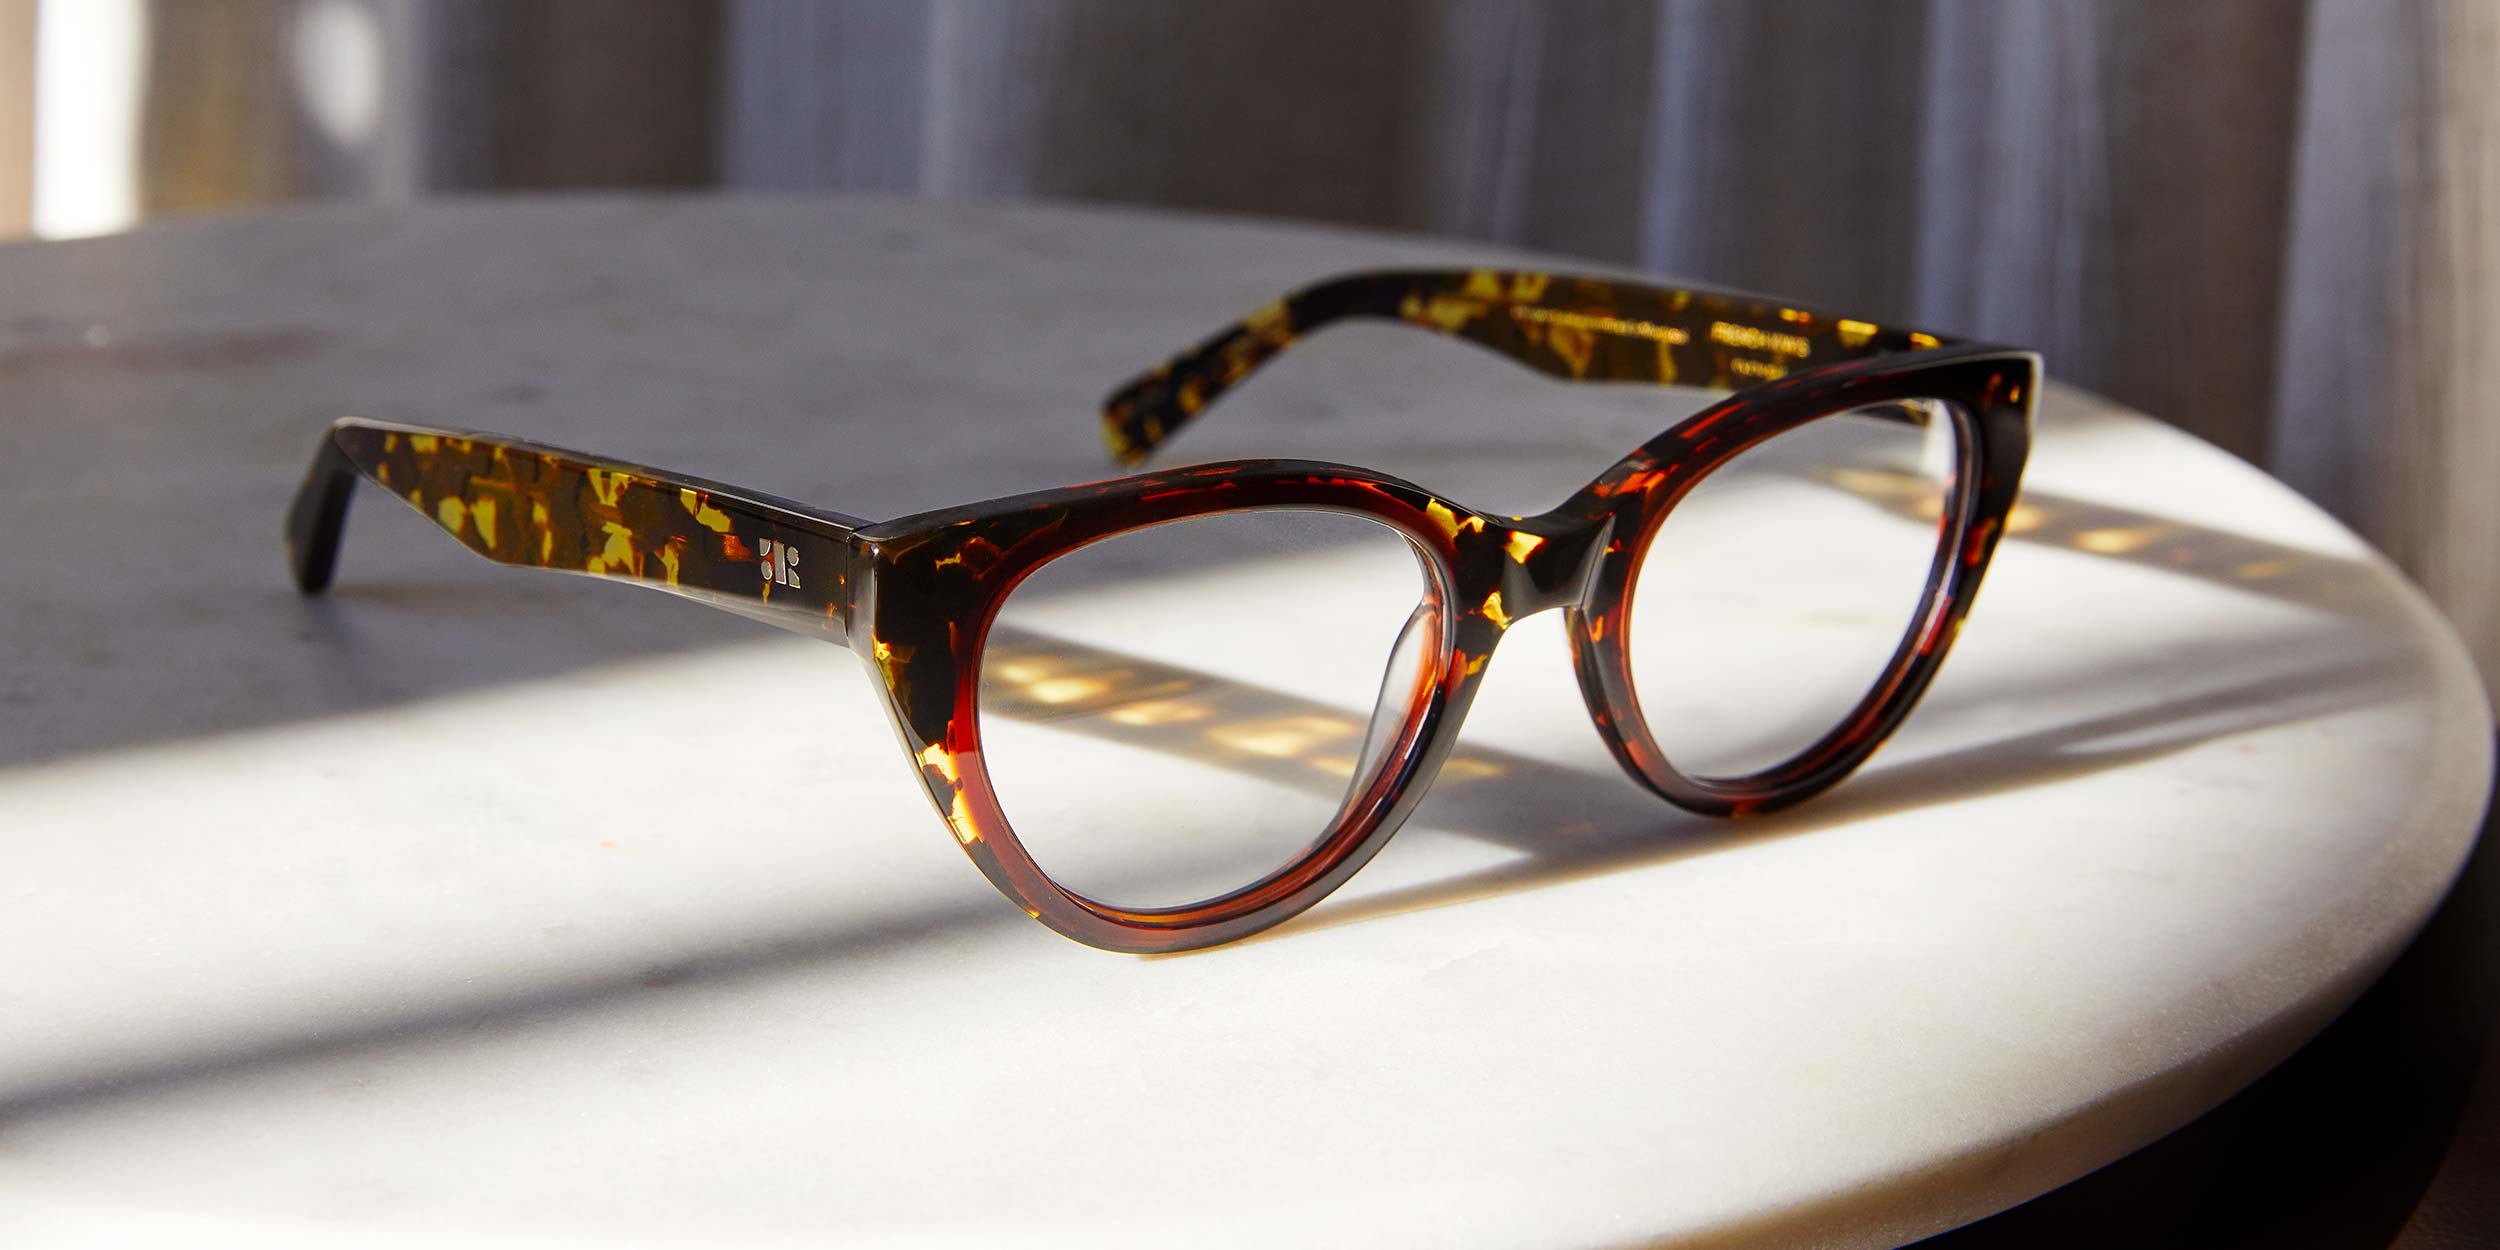 Photo Details of Colette Creme Reading Glasses in a room